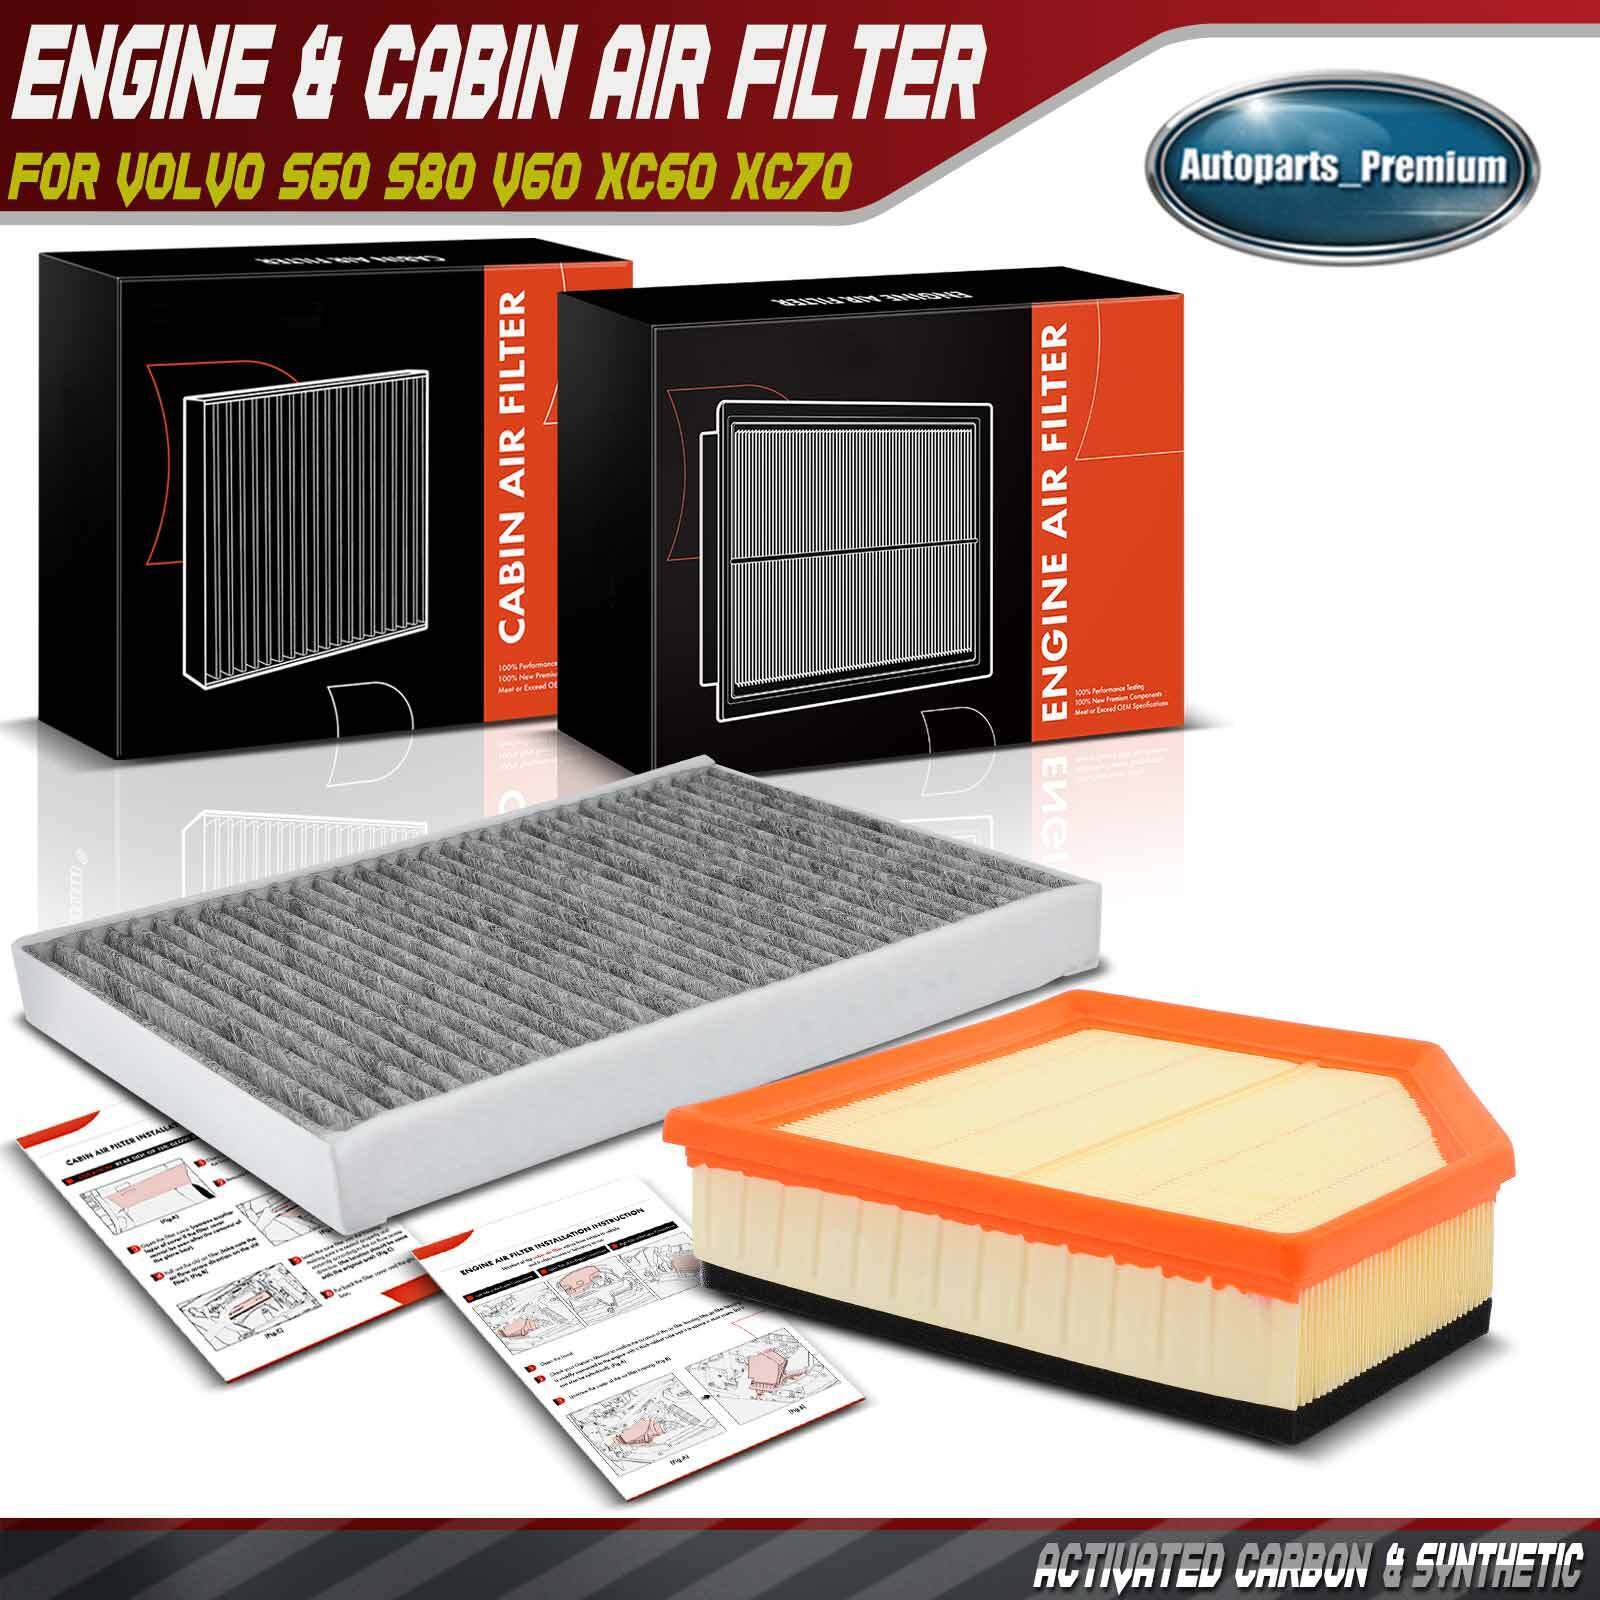 1x Engine & 1x Activated Carbon Cabin Air Filter for Volvo S60 S80 V60 XC60 XC70